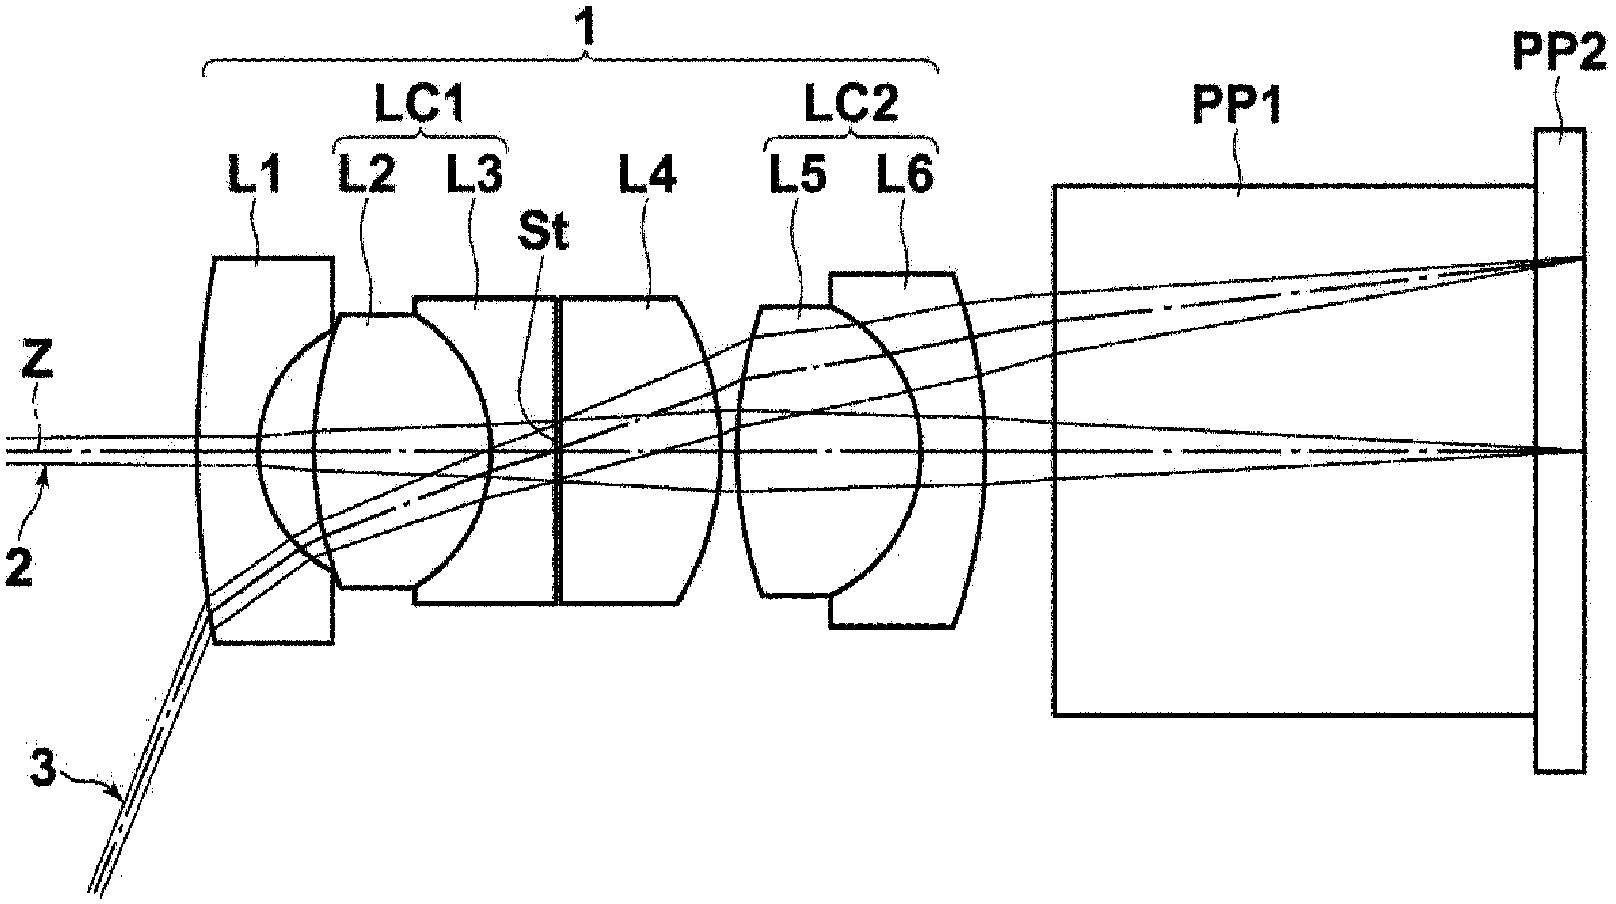 Image pick-up lens and image pick-up device